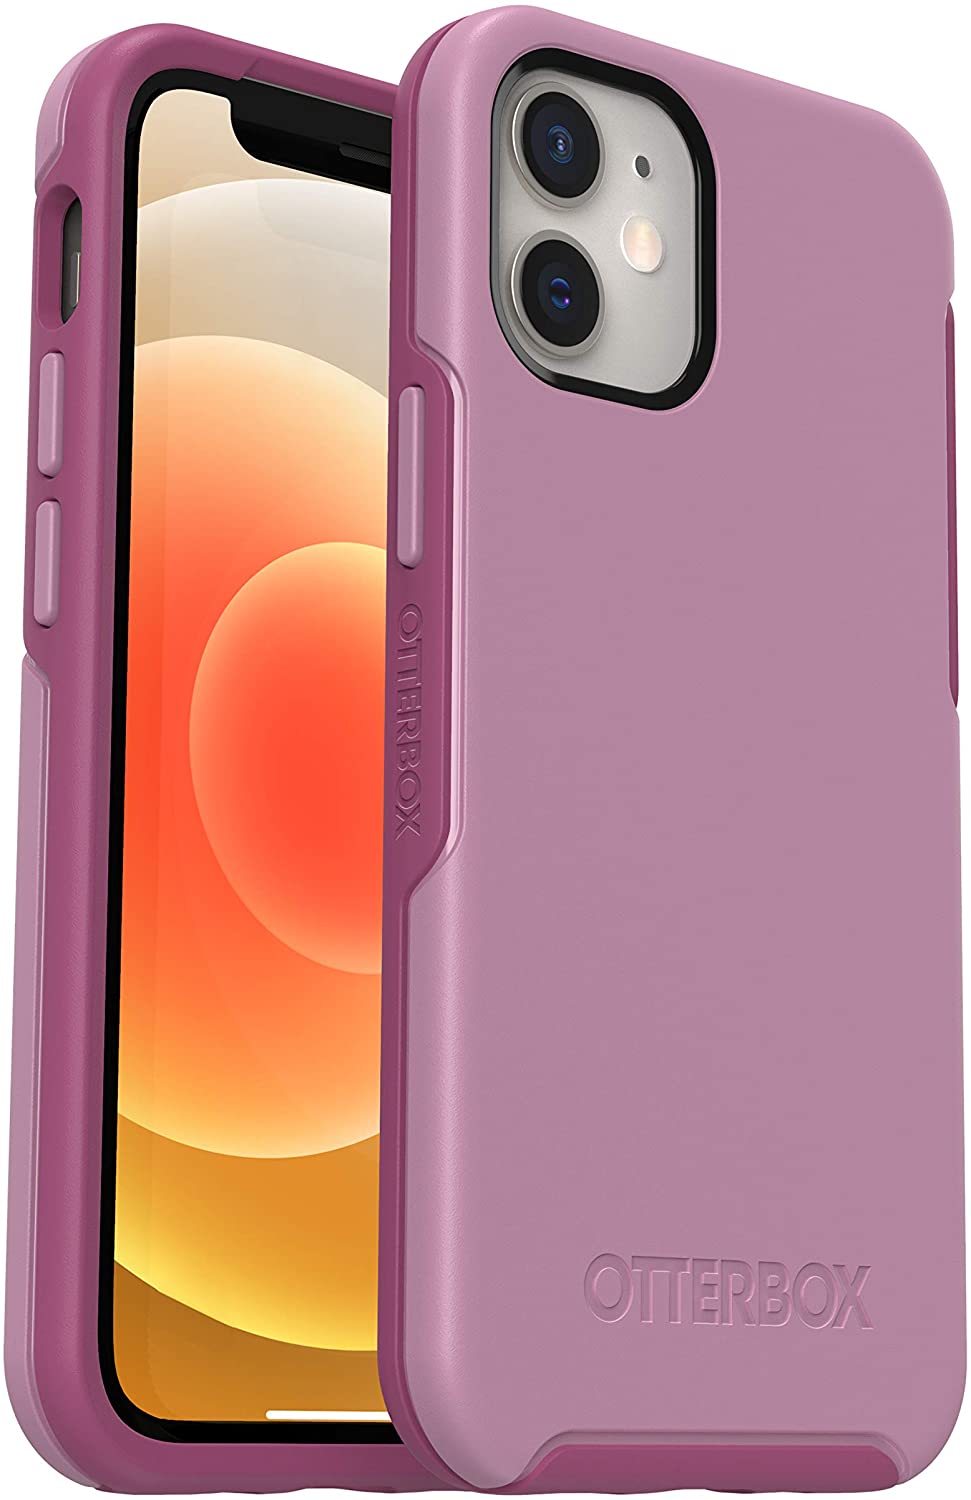 OtterBox SYMMETRY SERIES Case for Apple iPhone 12 Mini - Cake Pop Pink (New)